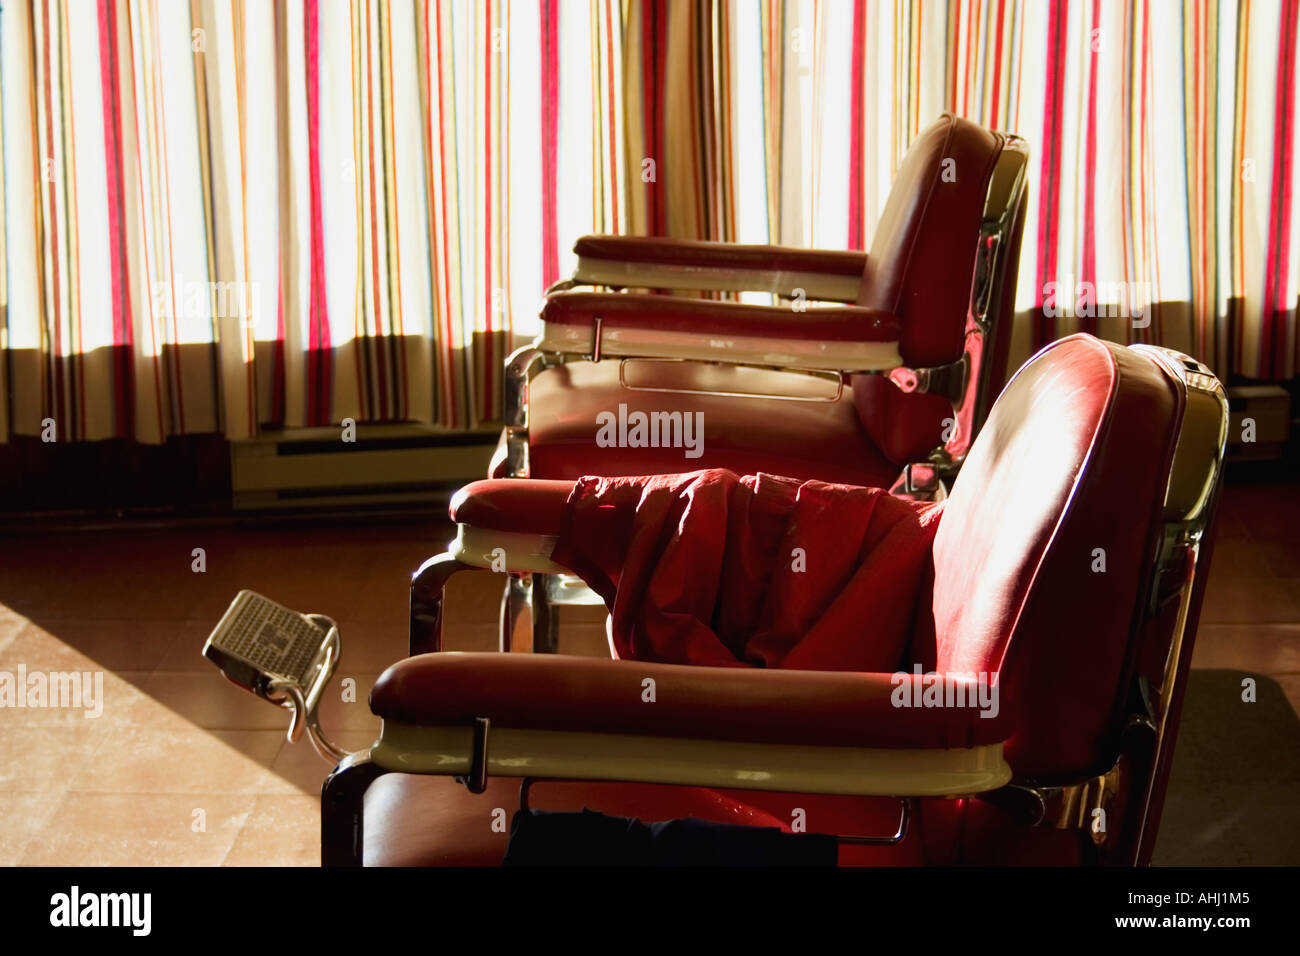 Barber shop chairs Stock Photo